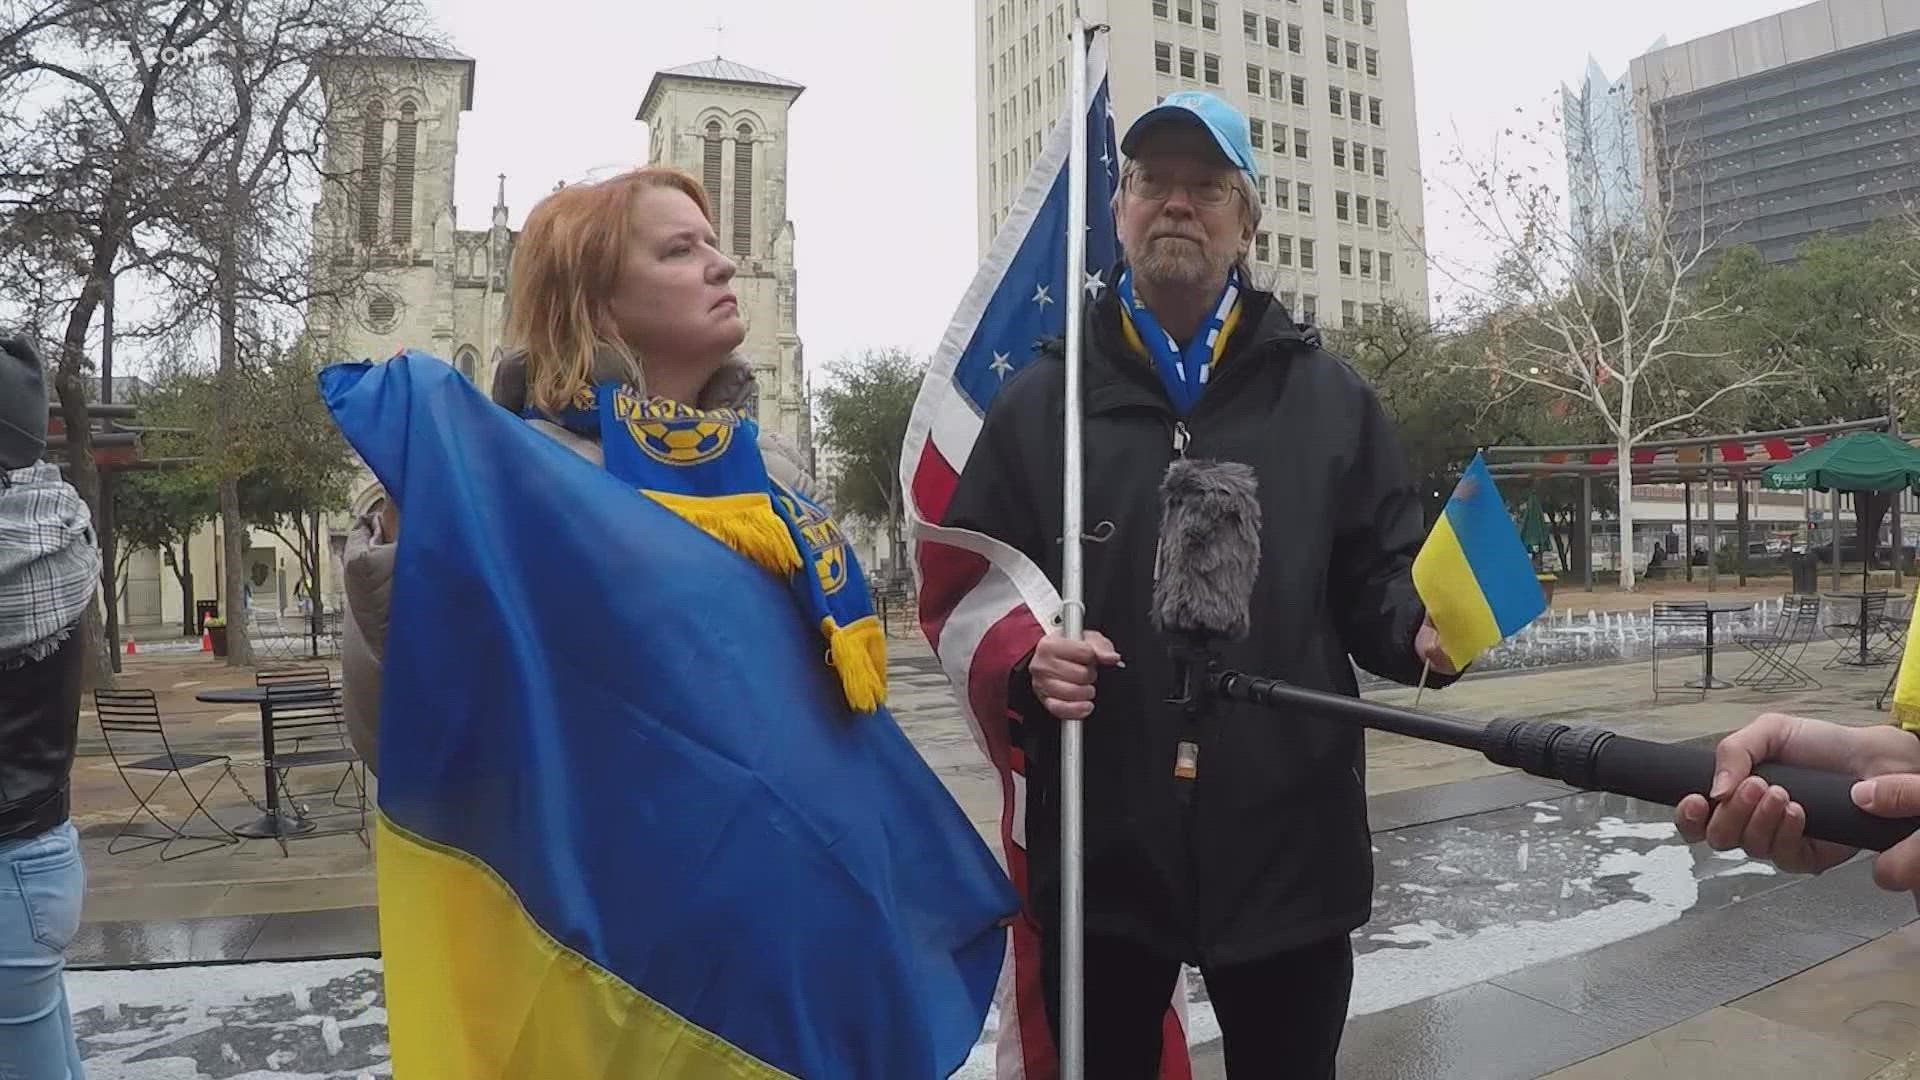 San Antonio's Ukrainian community came together today in response of the Russian invasion. 
Many fear a grim future while still holding onto hope for peace.